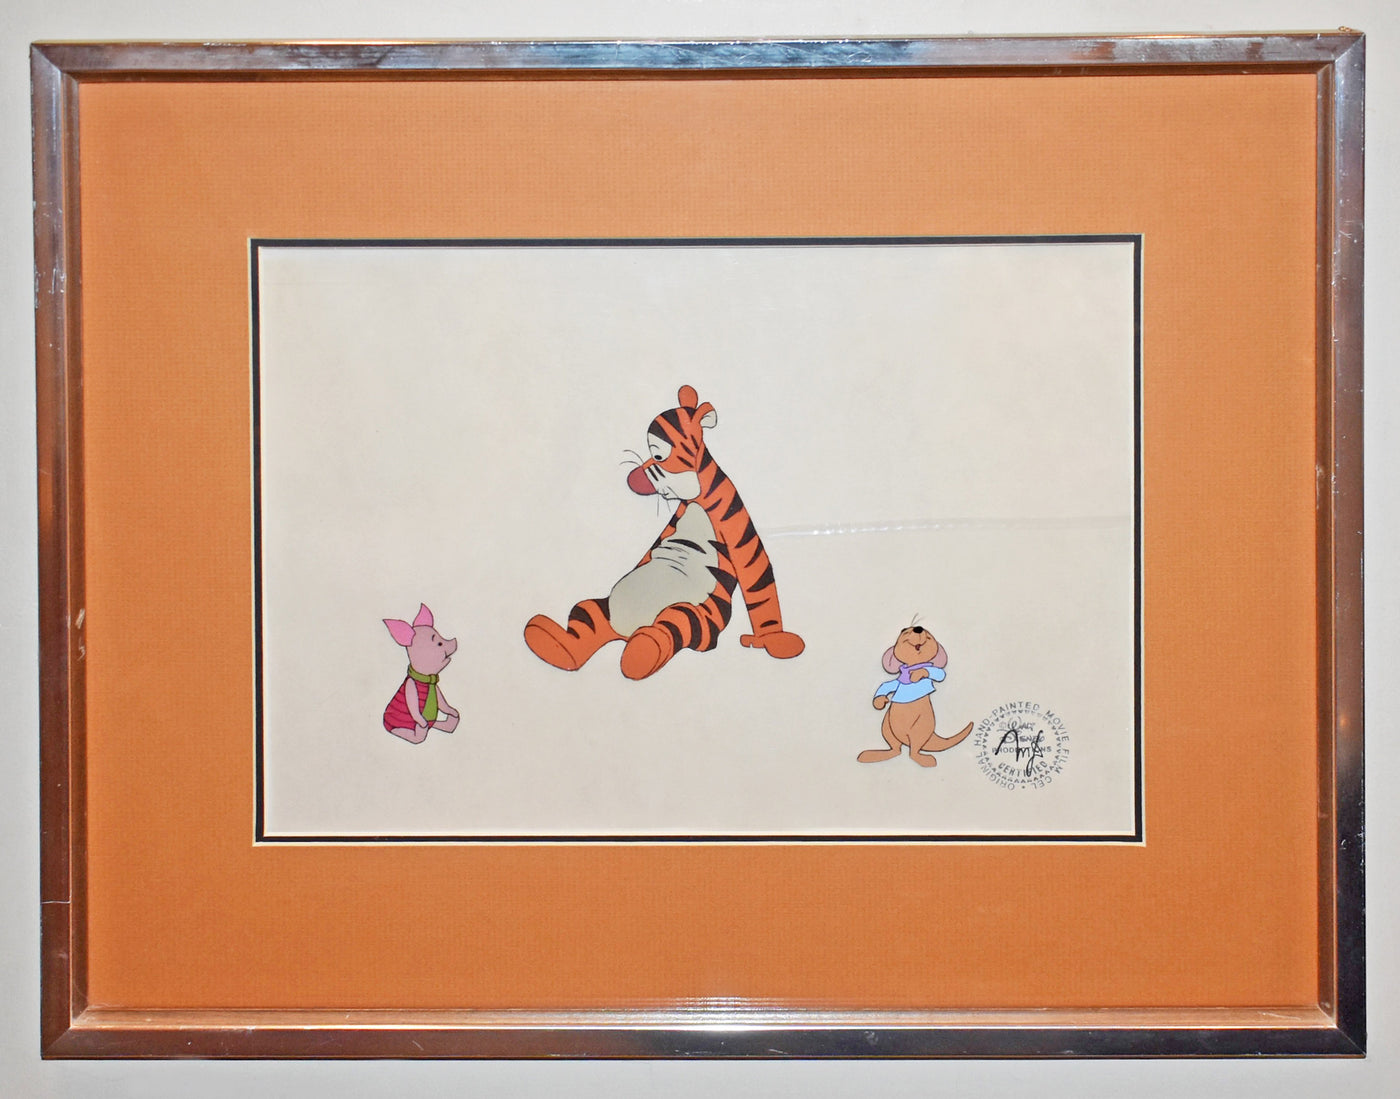 Original Walt Disney Production Cel from "The Many Adventures of Winnie the Pooh"